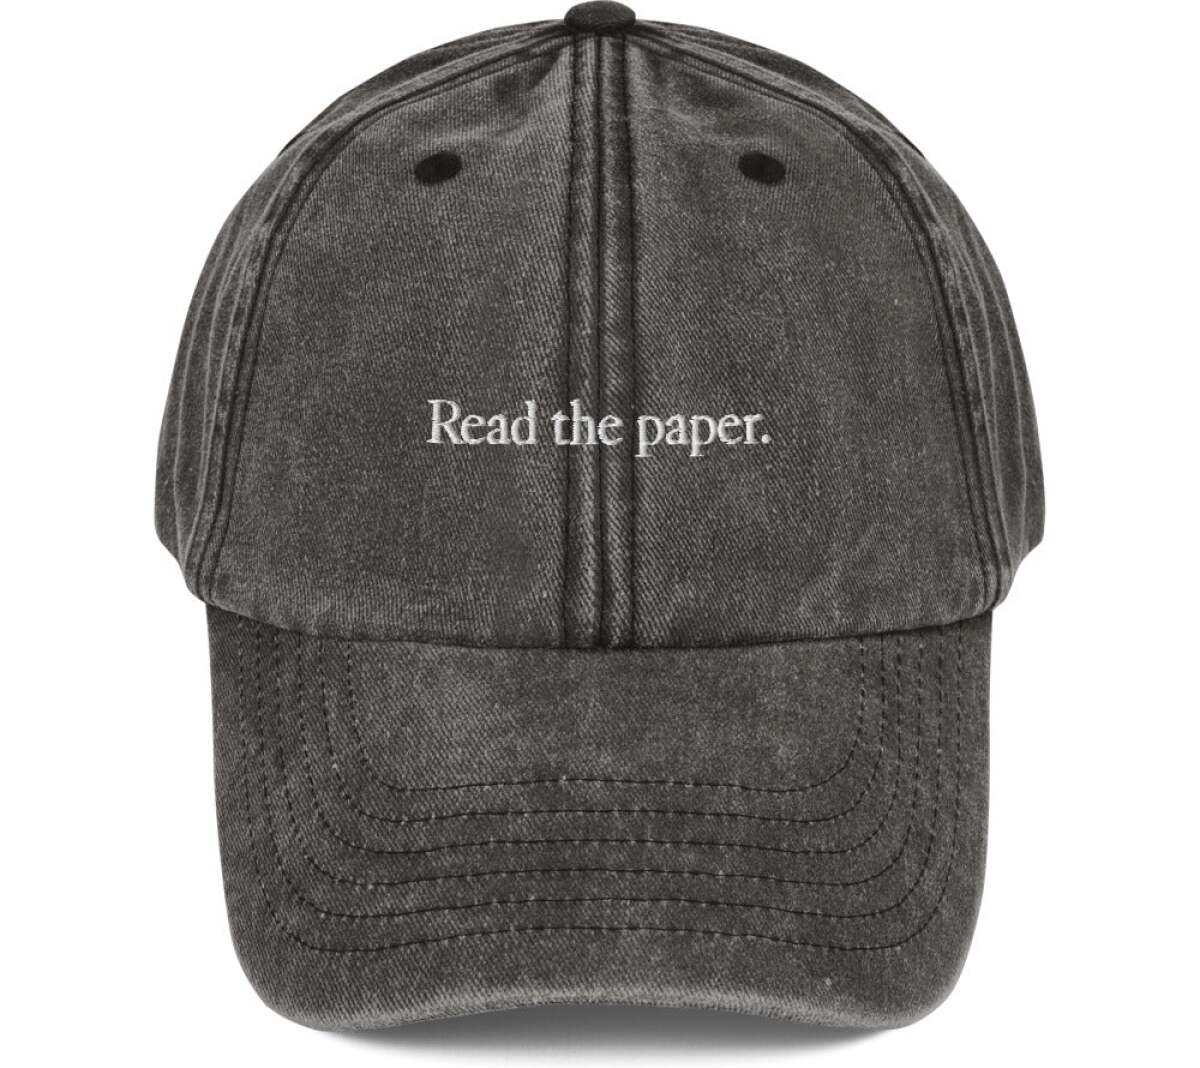 "Read the paper" hat.